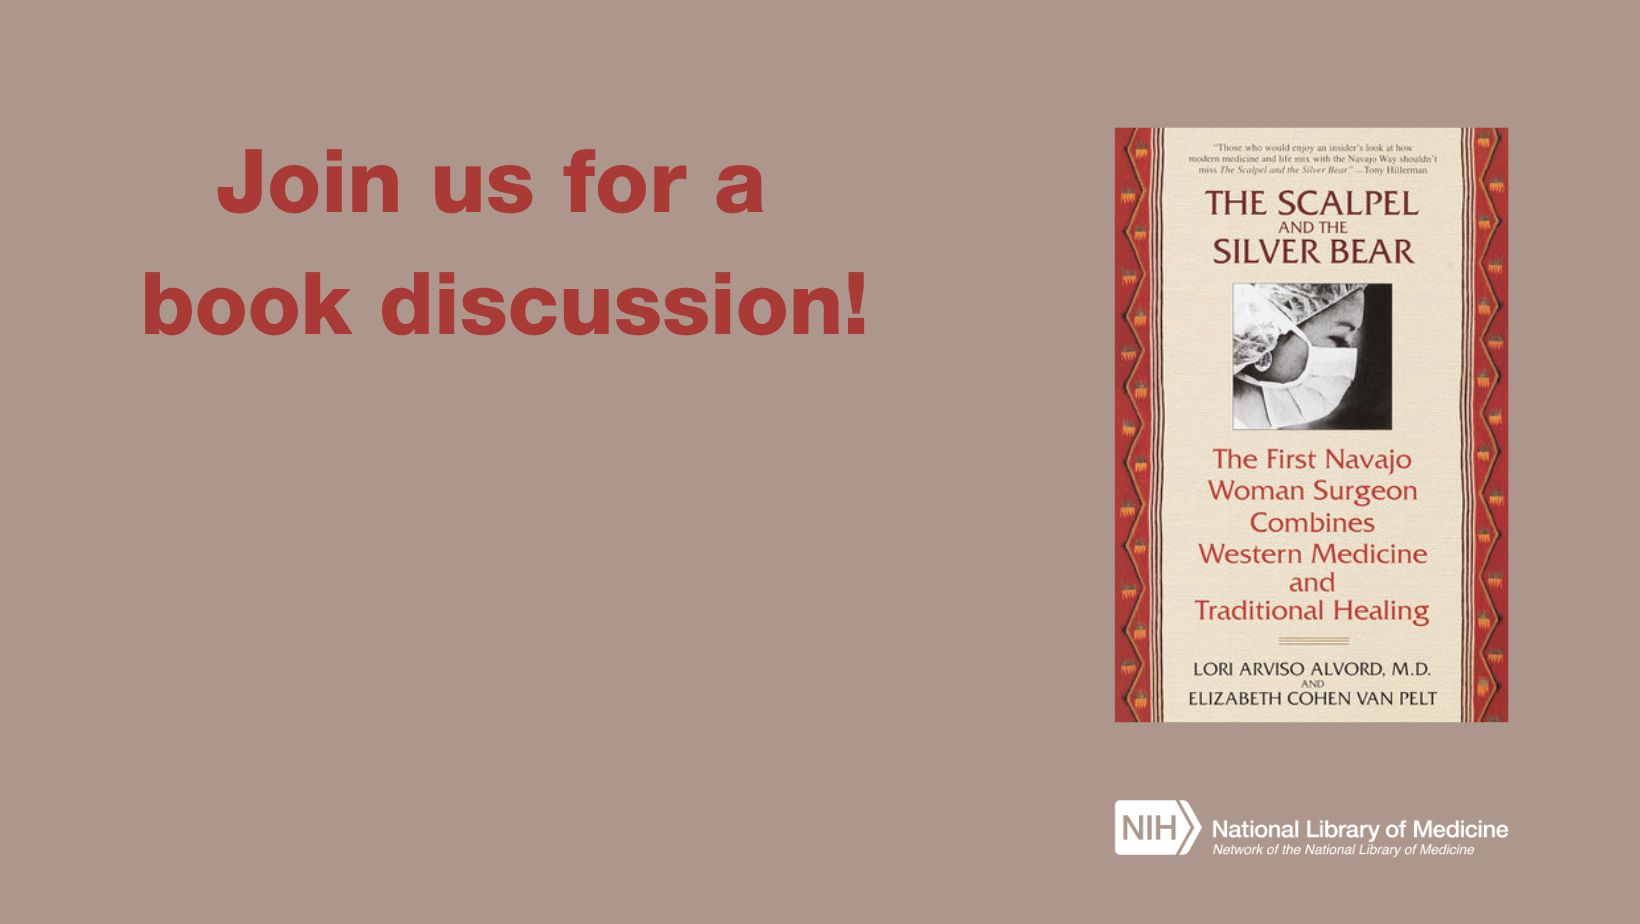 Join us for a book discussion Scalpel and the Bear